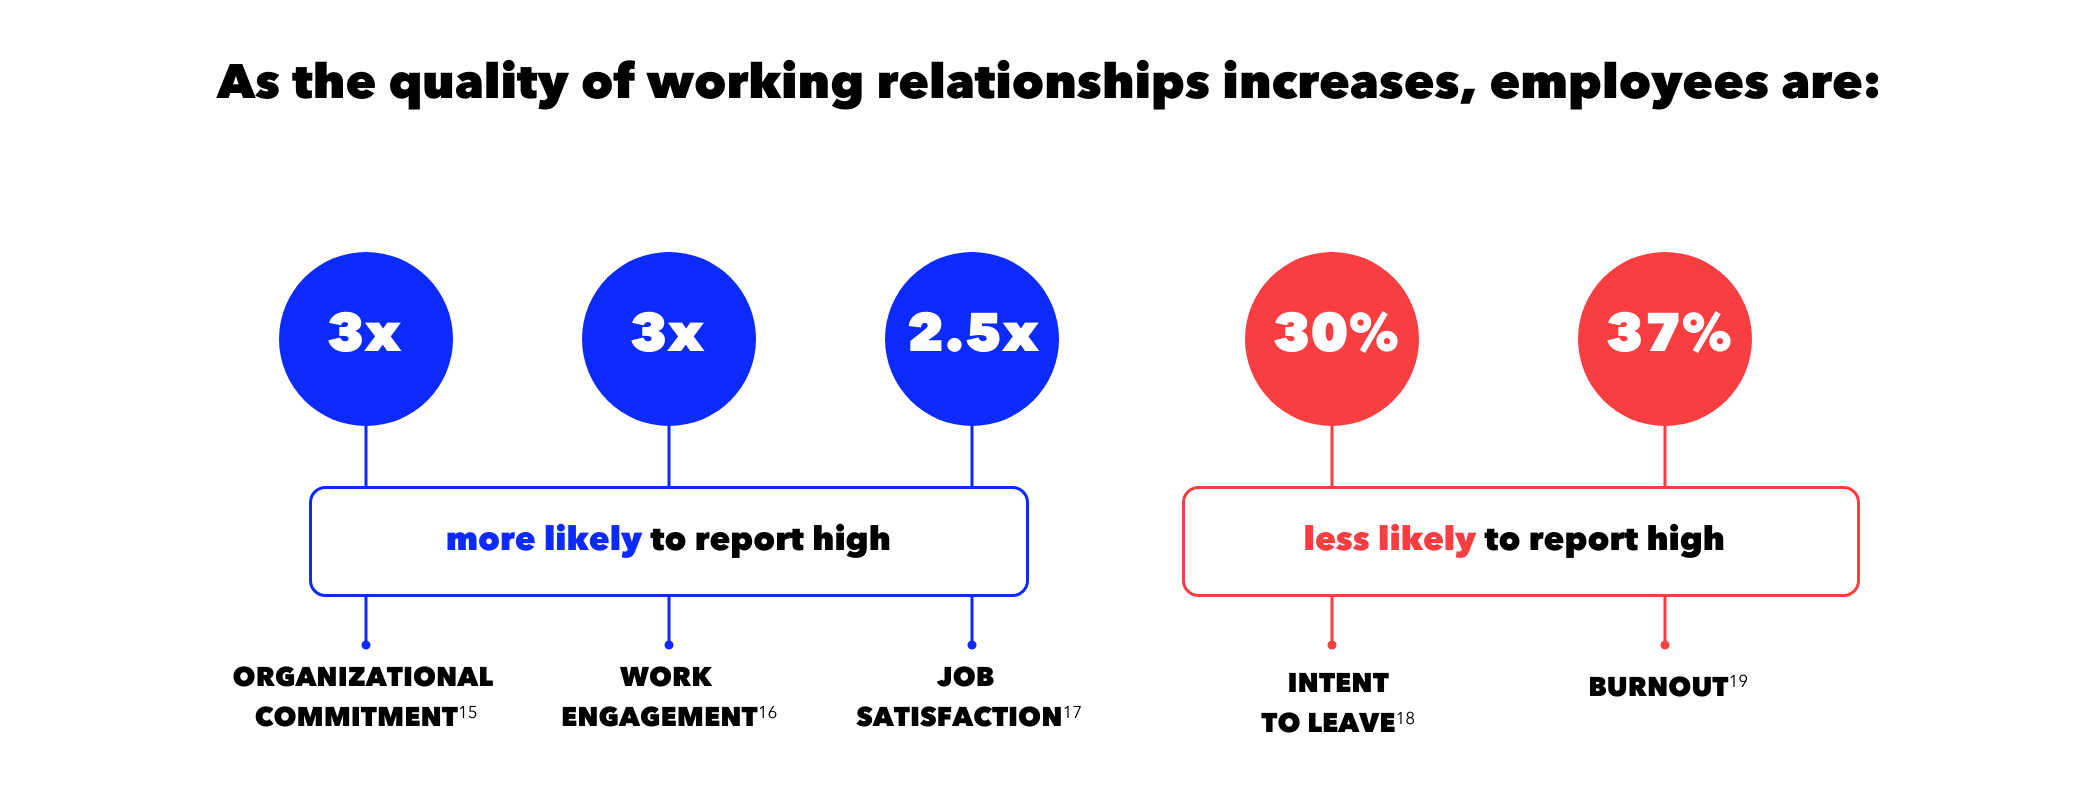 As the quality of working relationships increase, employees: more like to report high organizational commitment, work engagement, and job satisfaction; less likely to report high levels of intent to leave and burnout.